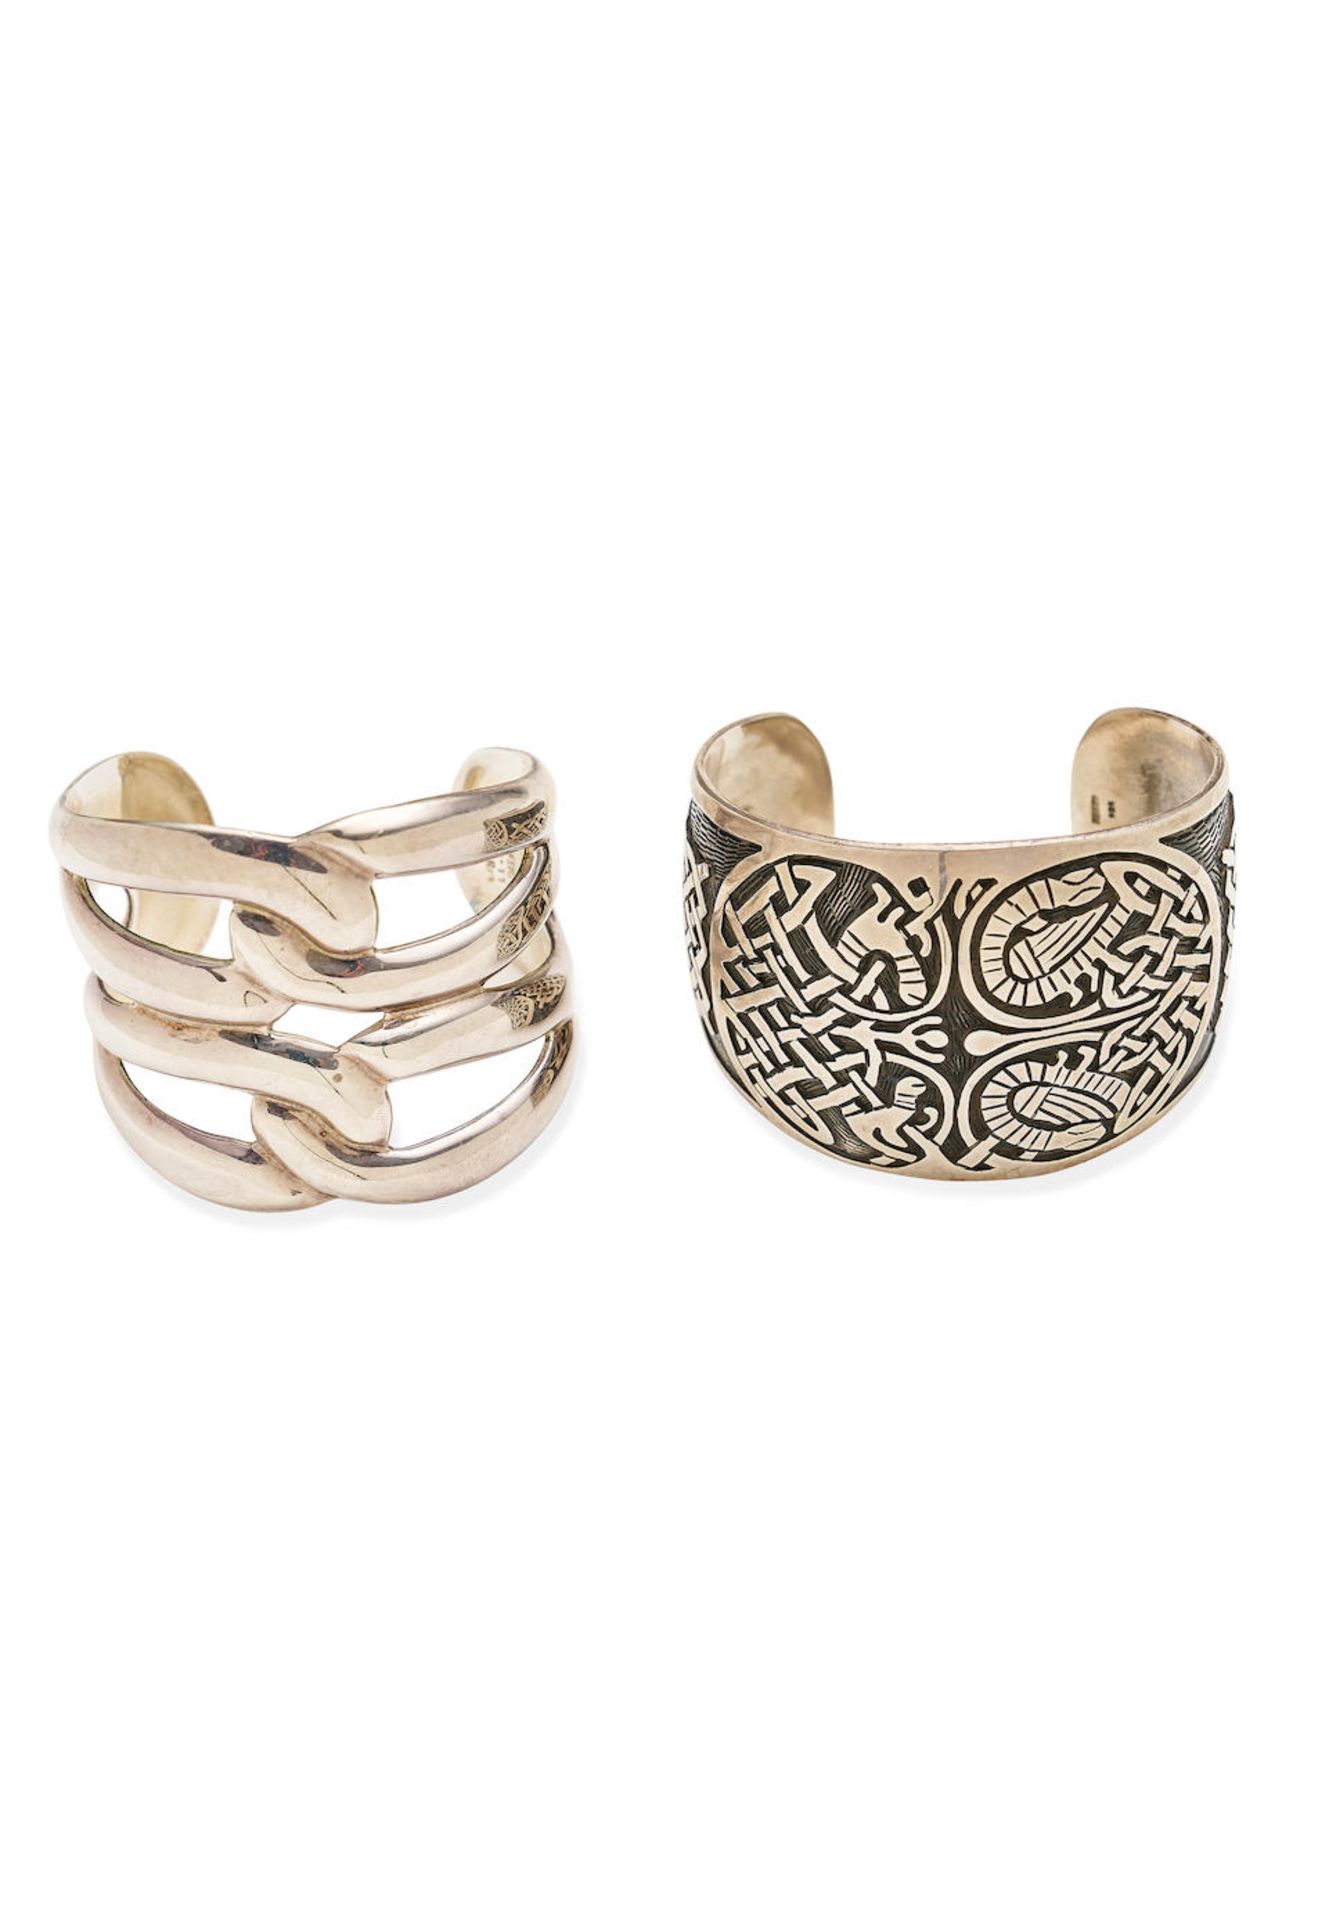 TWO STERLING SILVER CUFFS